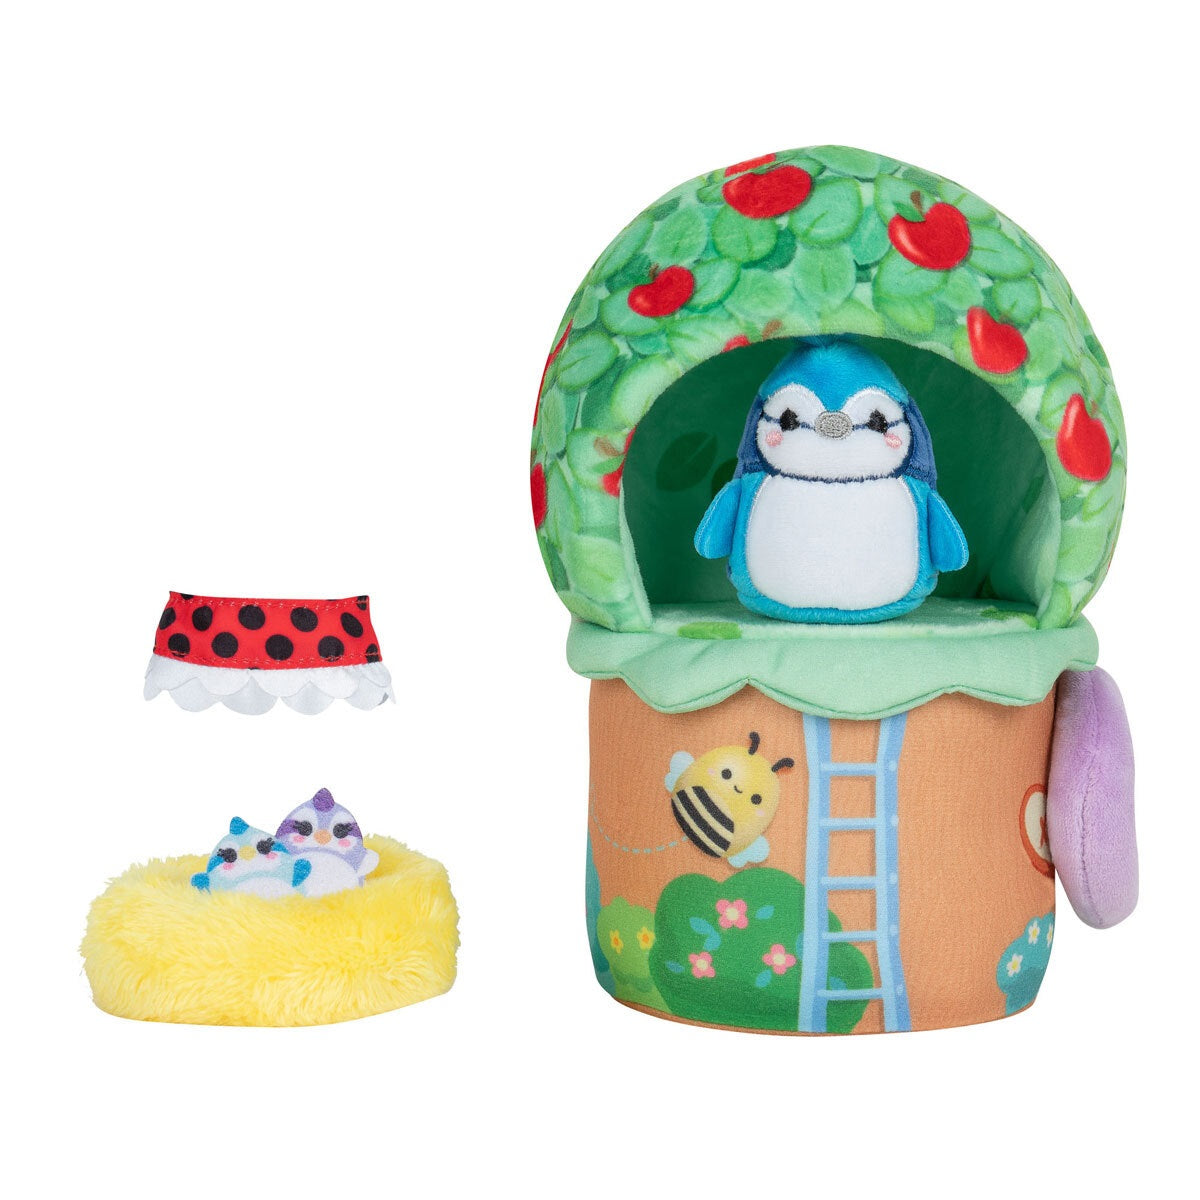 Squishville 2' Mini Squishmallows Play Scene - Tip Top Treehouse